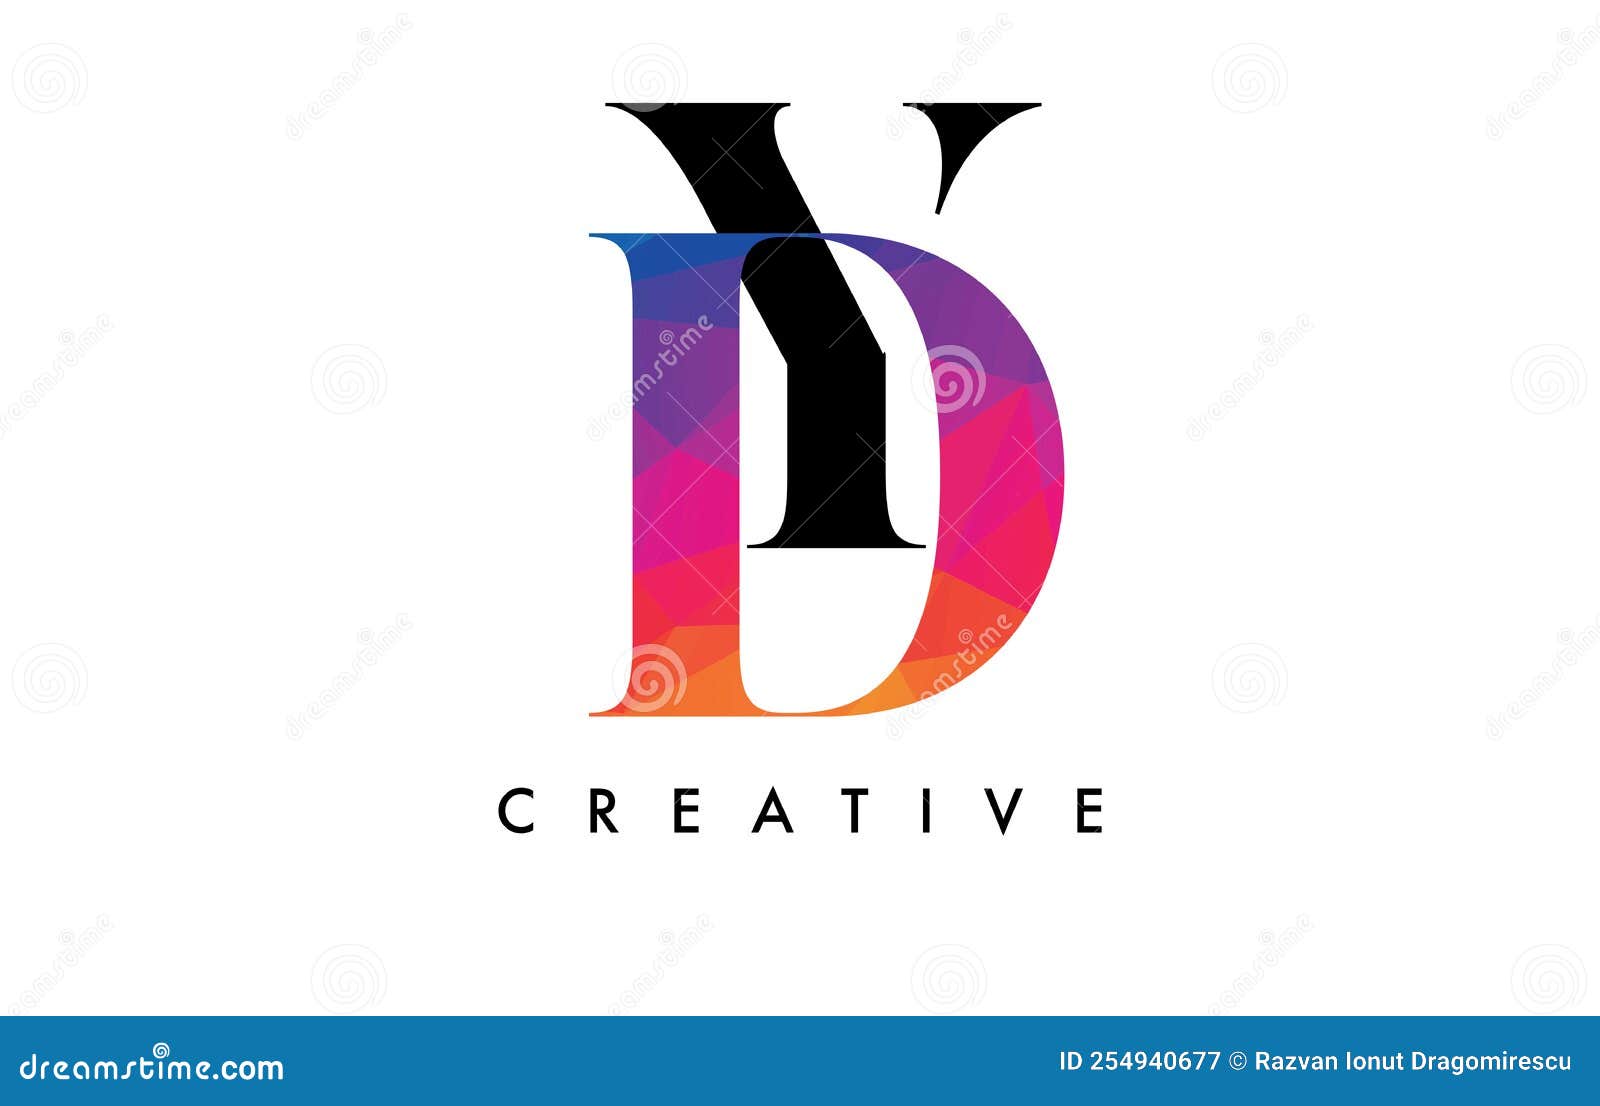 YD Letter Design with Creative Cut and Colorful Rainbow Texture Stock ...